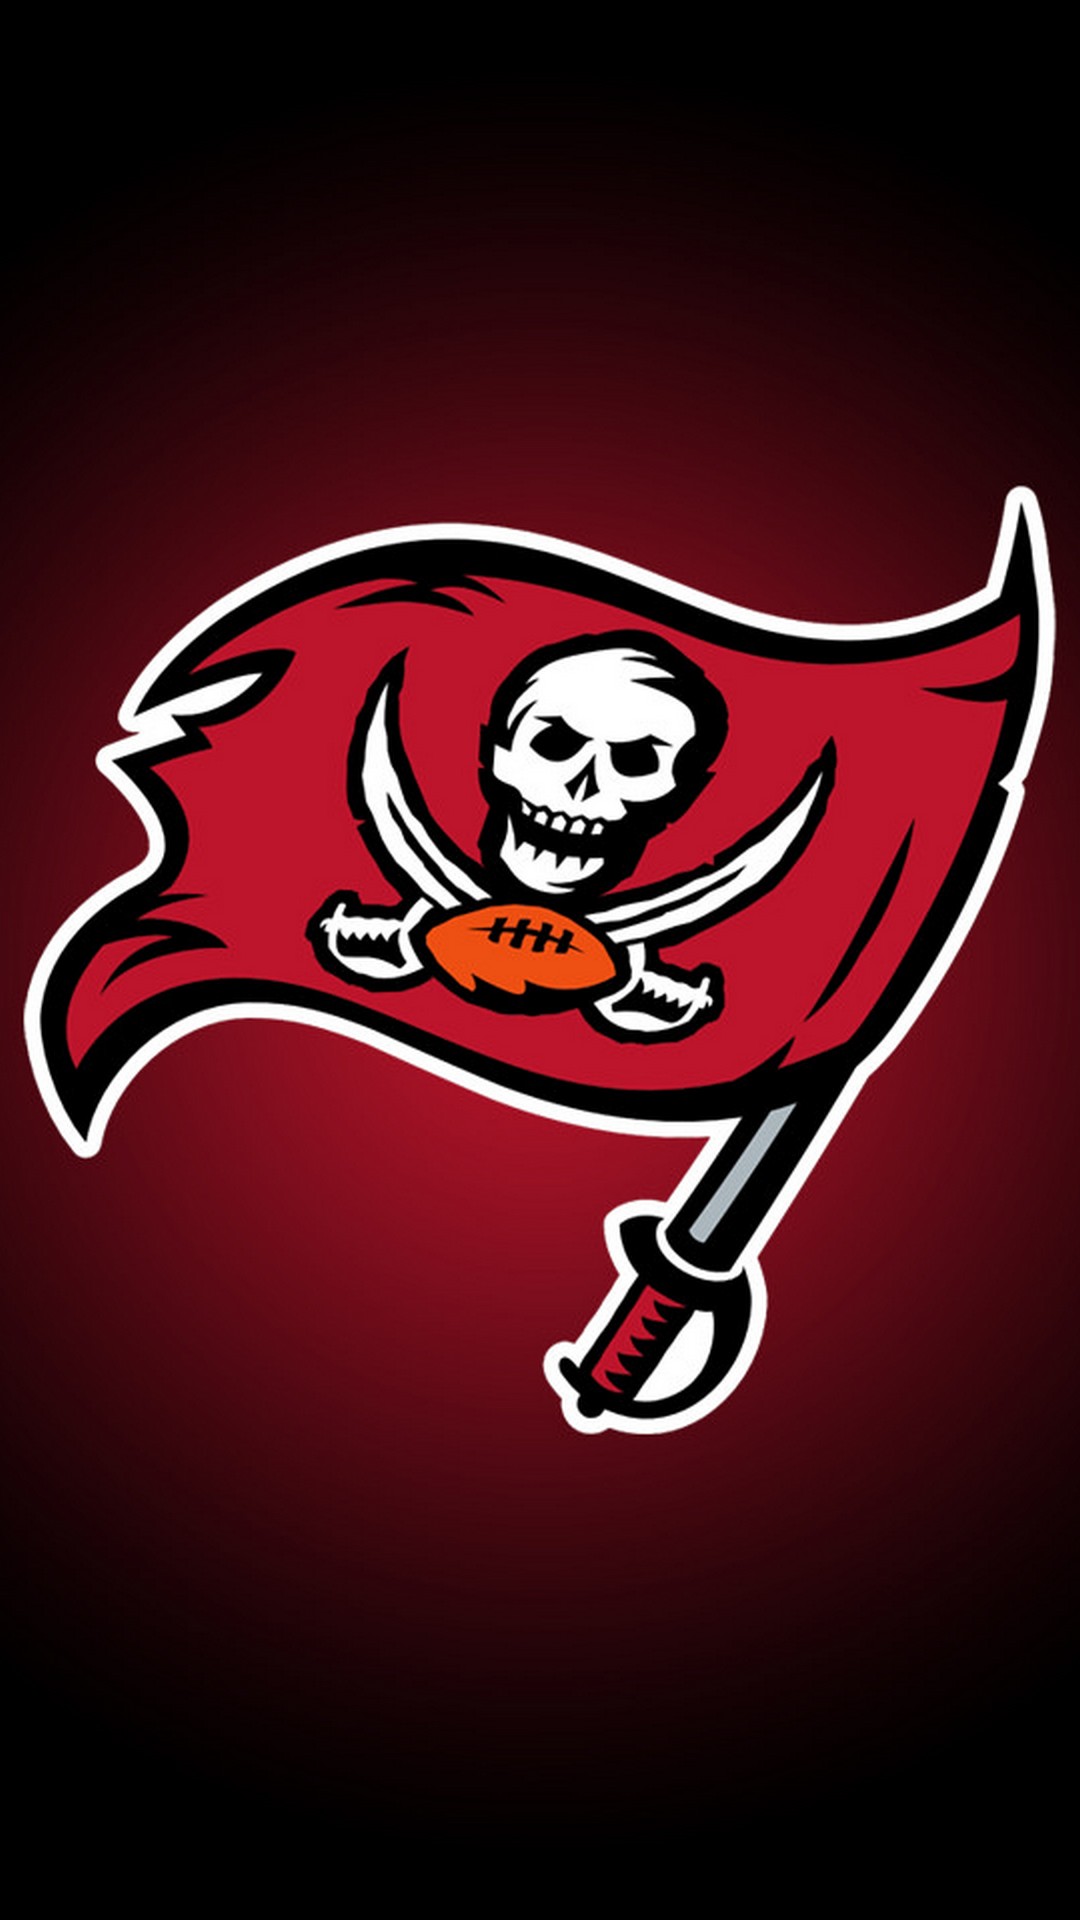 Tampa Bay Buccaneers iPhone Wallpaper Size With high-resolution 1080X1920 pixel. Donwload and set as wallpaper for your iPhone X, iPhone XS home screen backgrounds, XS Max, XR, iPhone8 lock screen wallpaper, iPhone 7, 6, SE, and other mobile devices